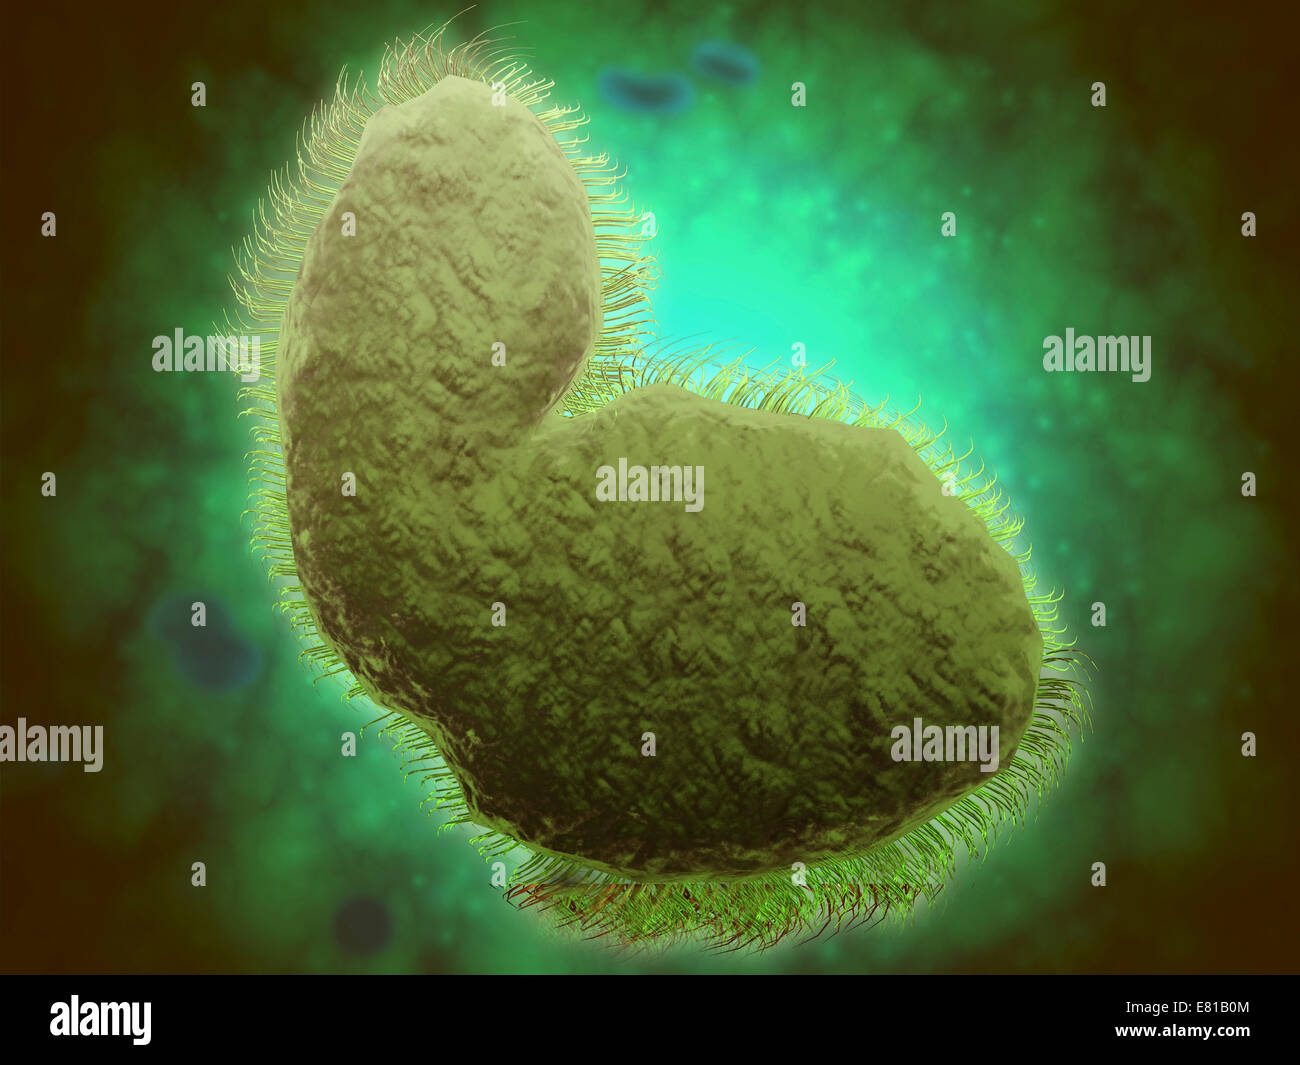 Cold Virus Cell Stock Photos & Cold Virus Cell Stock Images - Alamy1300 x 1065